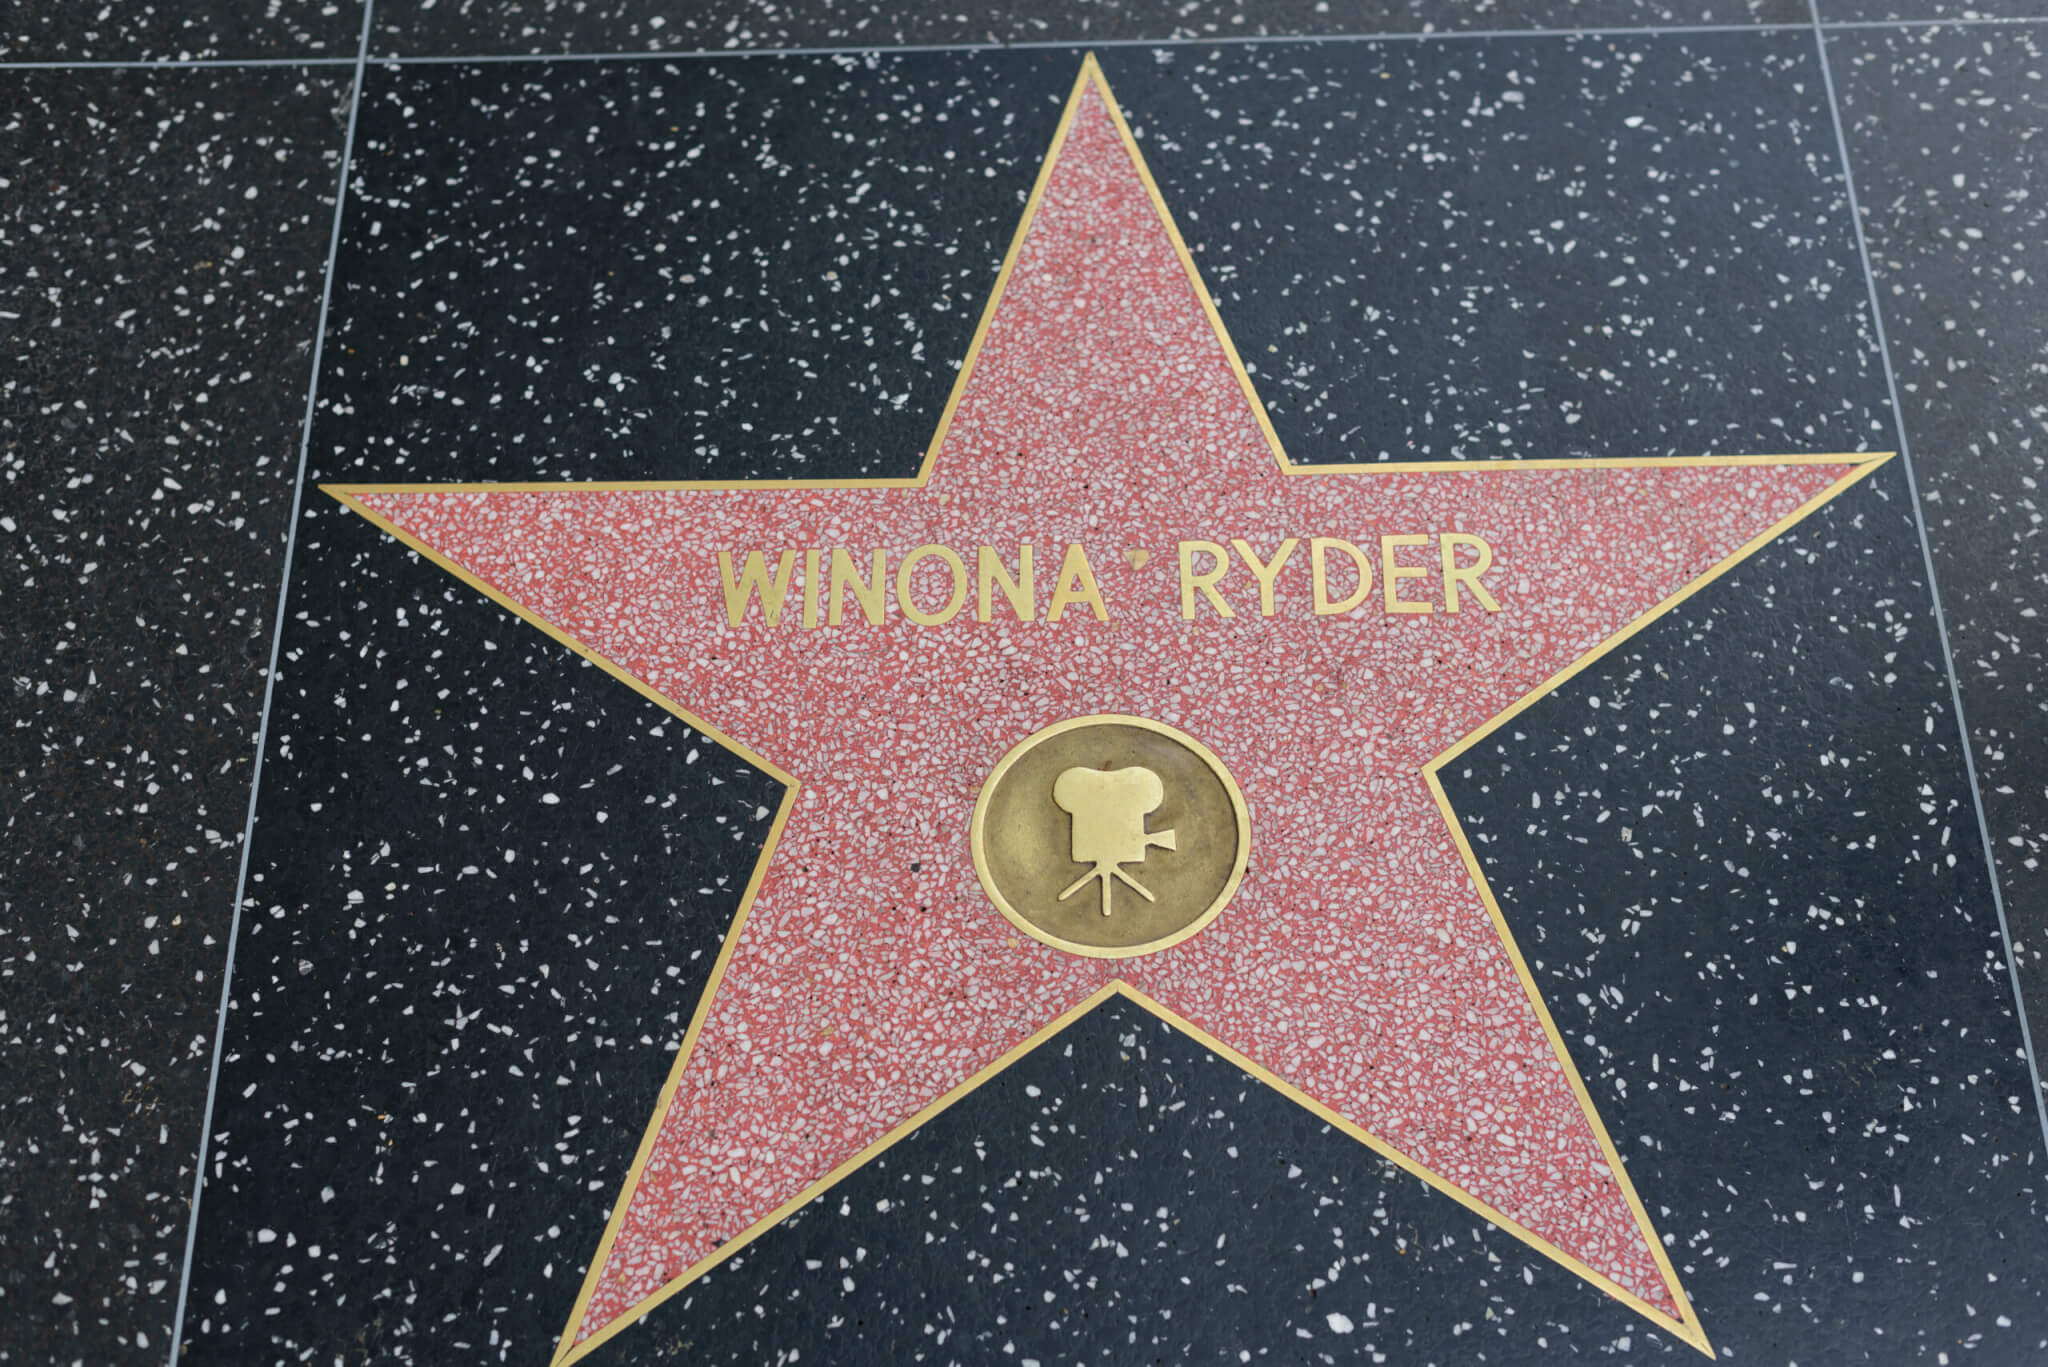 Winona Ryder's star on the Hollywood Walk of Fame